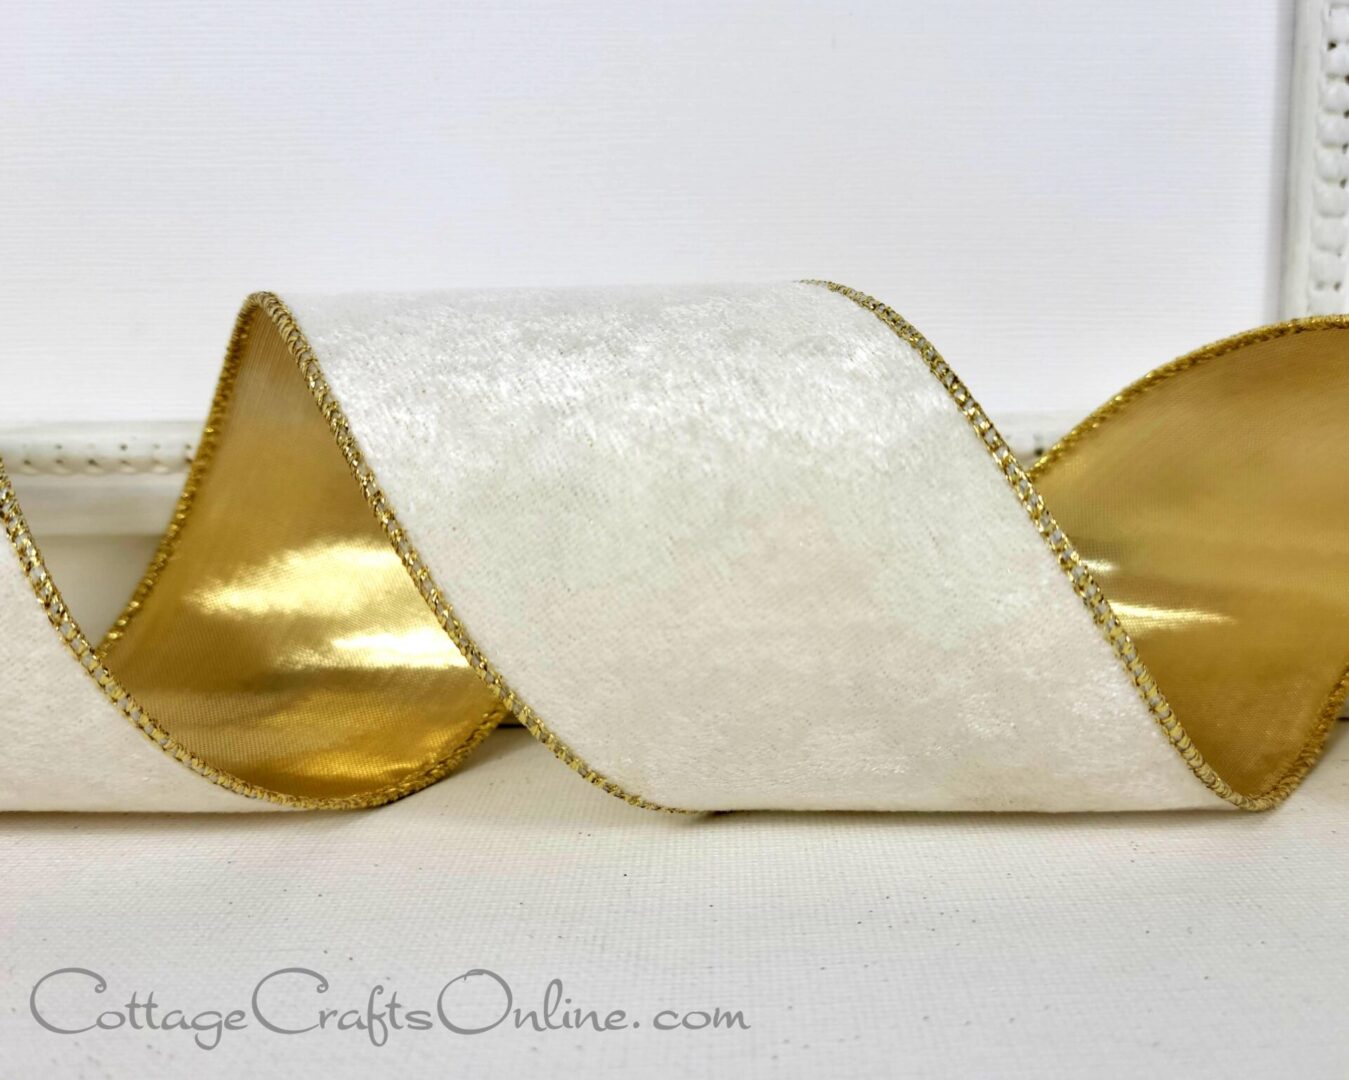 Brushed ivory velvet with gold back 2.5" wide wired ribbon from the Etsy shop of Cottage Crafts Online.